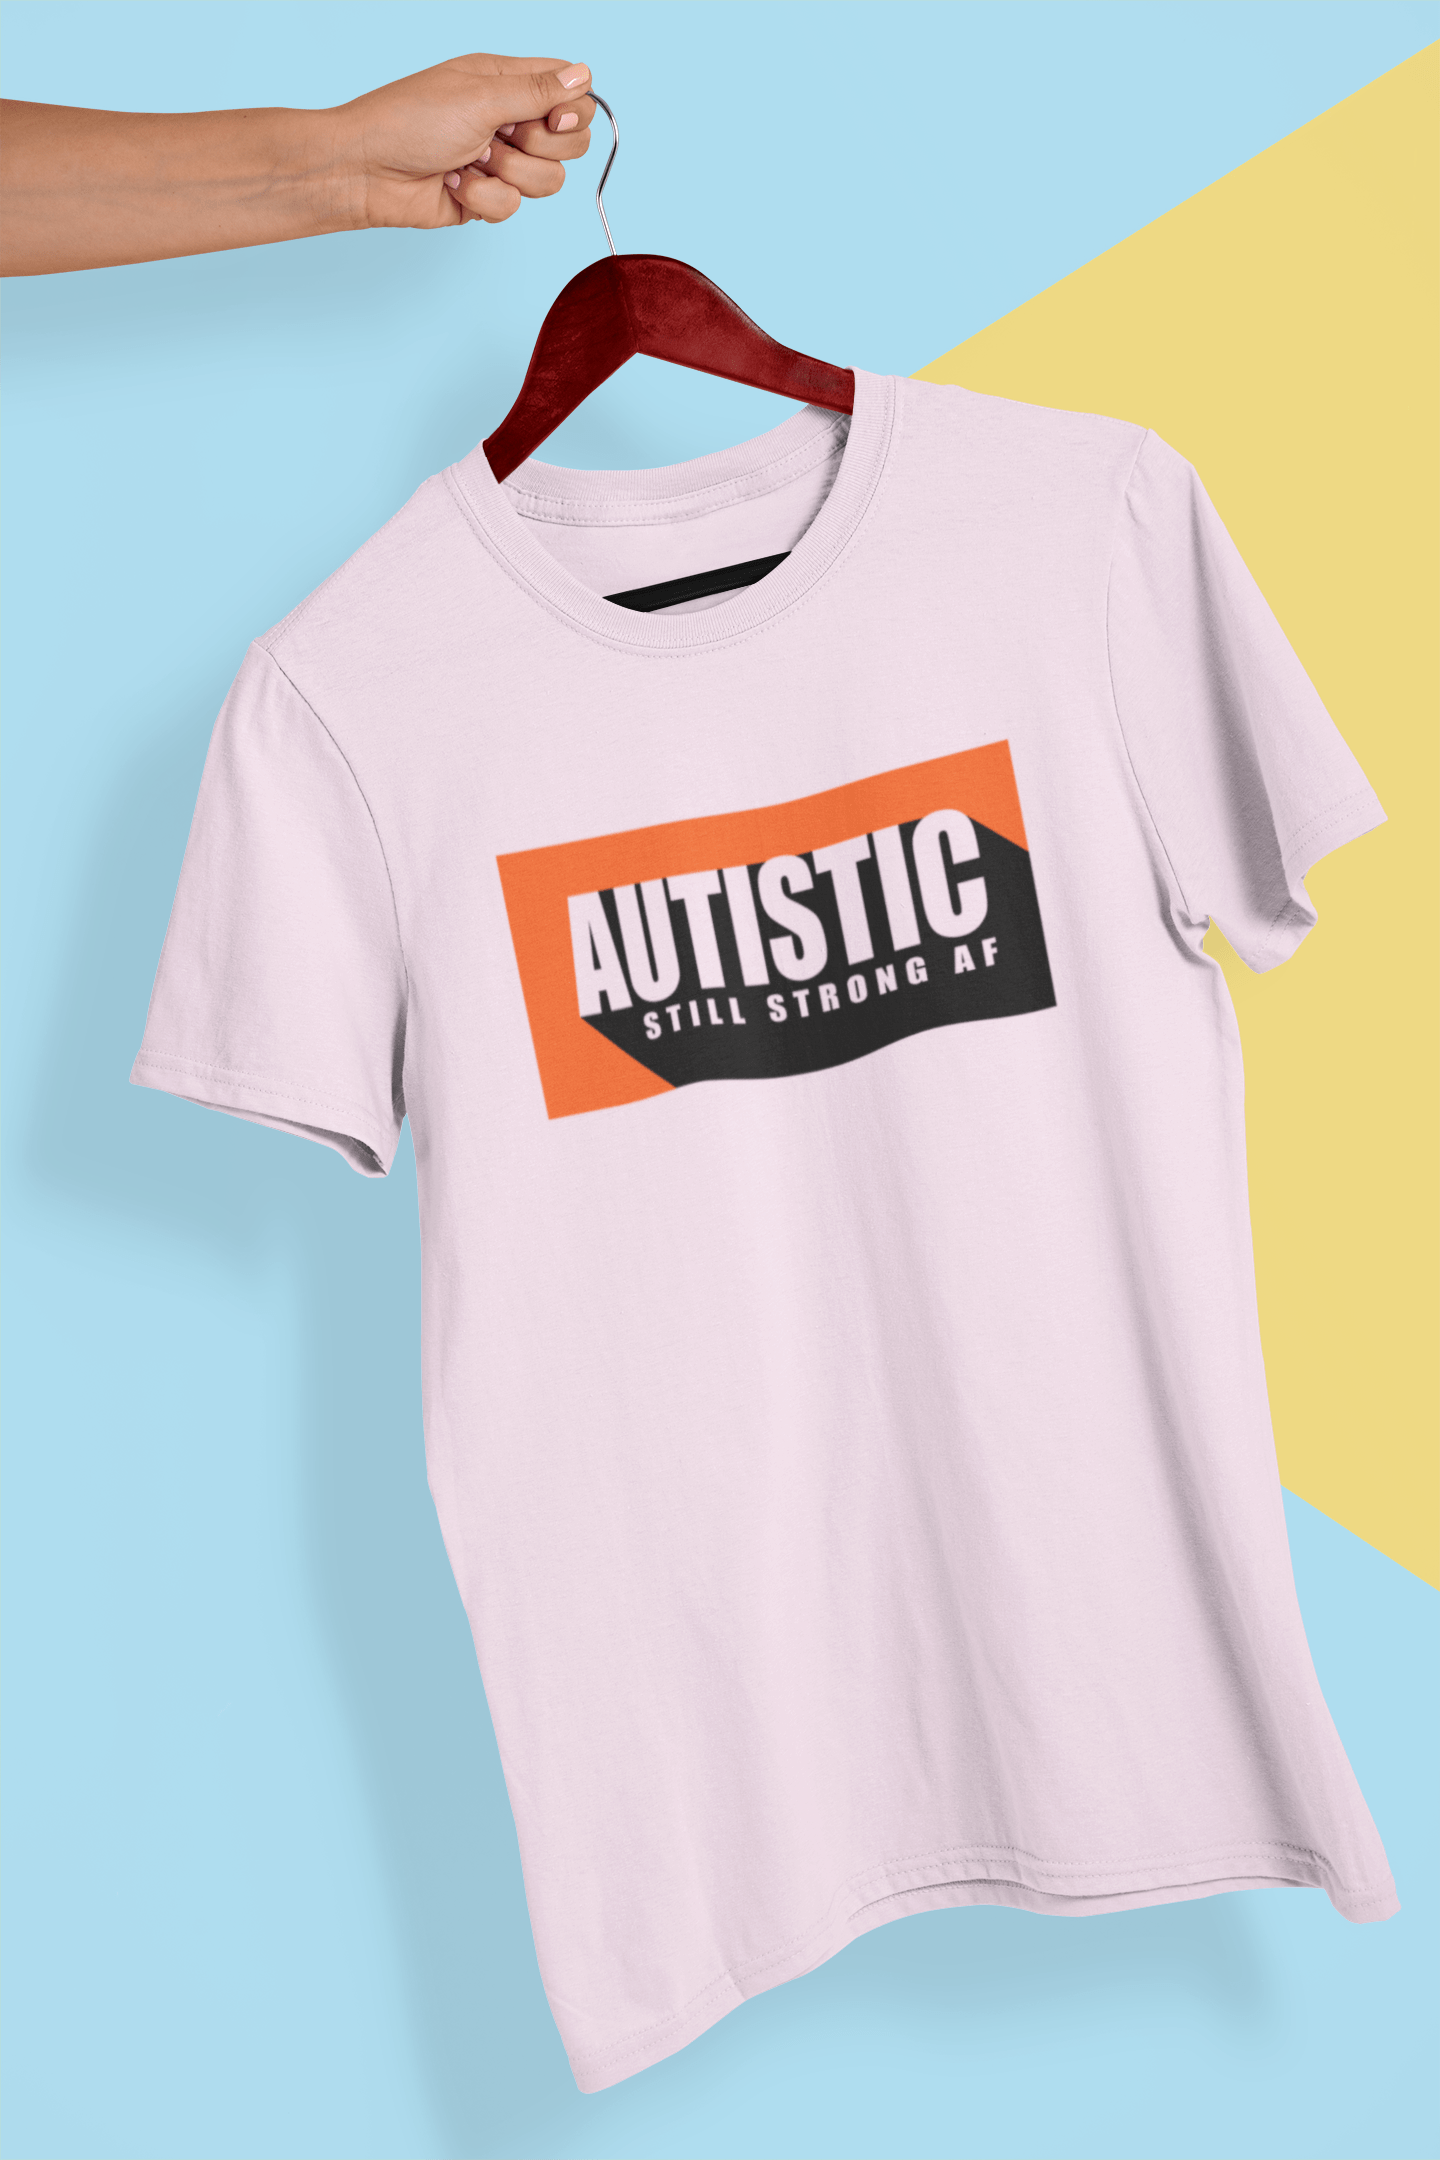 This is The Remix T-shirt Autistic Still Strong AF - Unisex T-Shirt